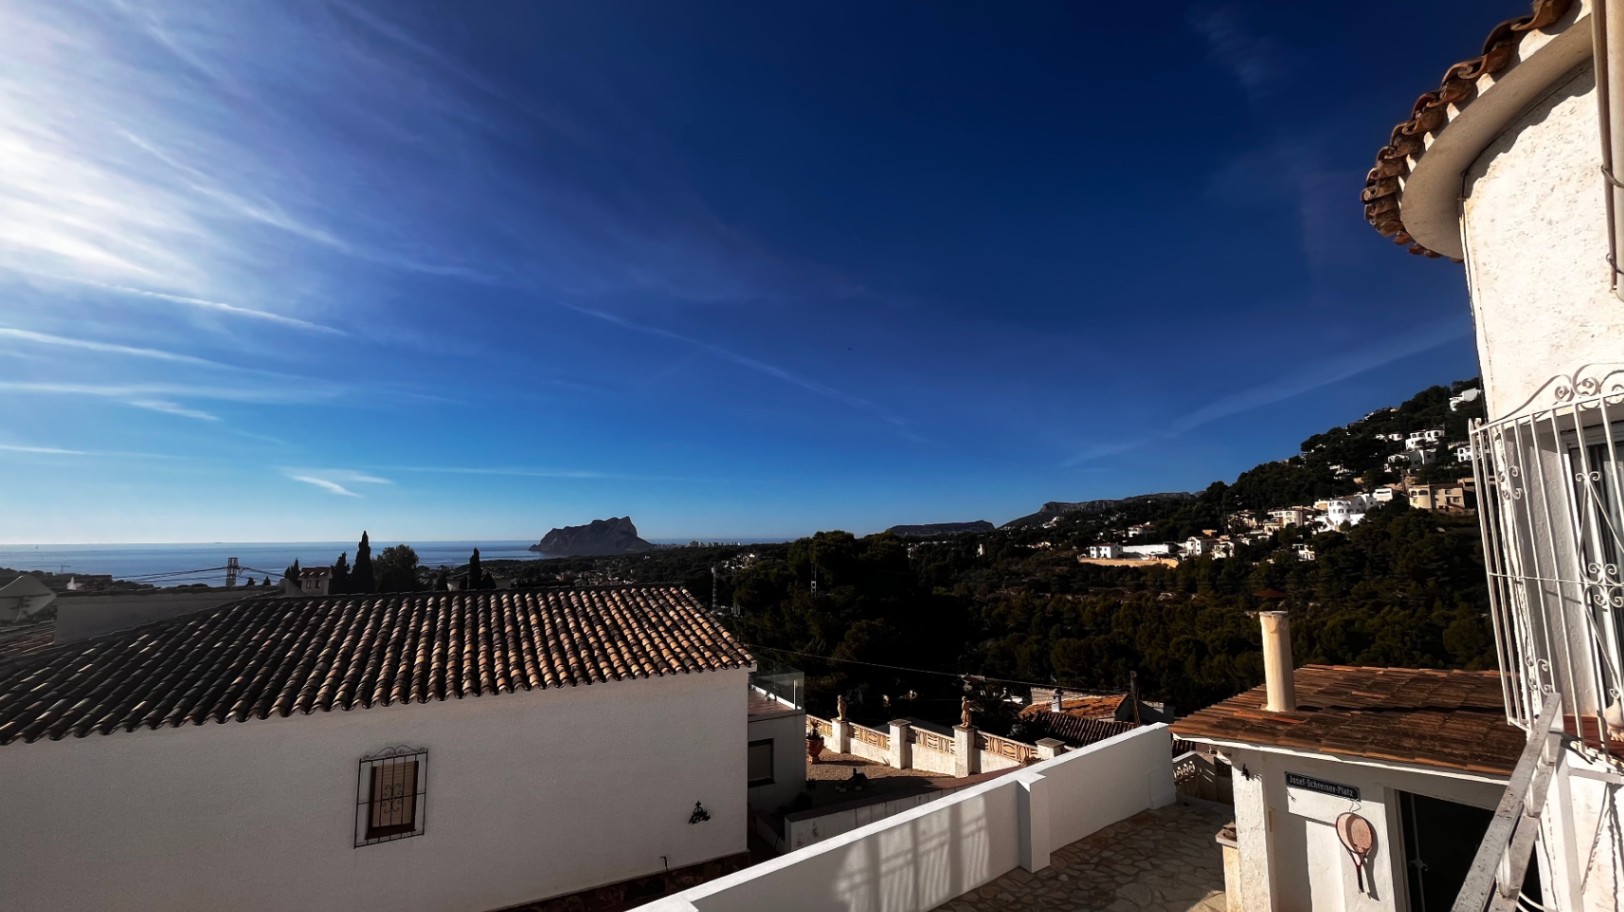 Fotogalería - 6 - Exceptional homes in the Costa Blanca. Unparalleled Service. Exceptional properties in the Costa Blanca